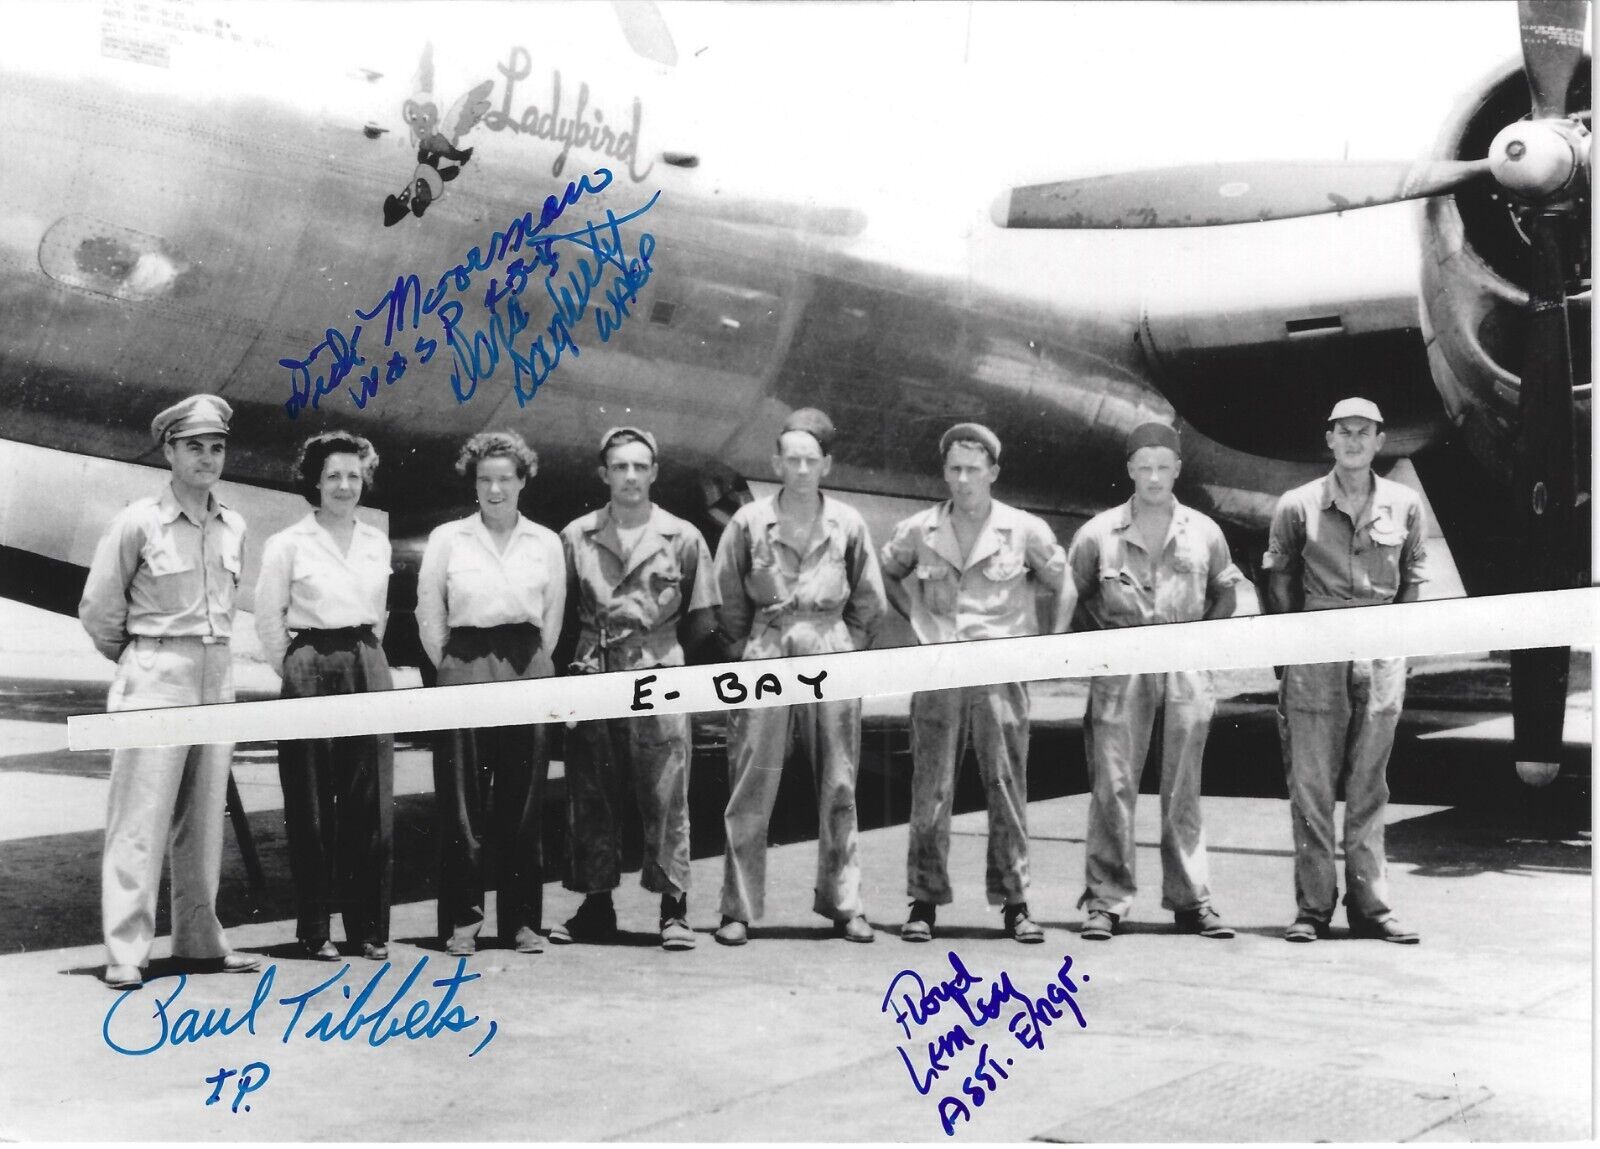 Paul Tibbets & Wasp Pilots, B29, Signed 5 x 7 by Four Crewmembers, Rare? 509th